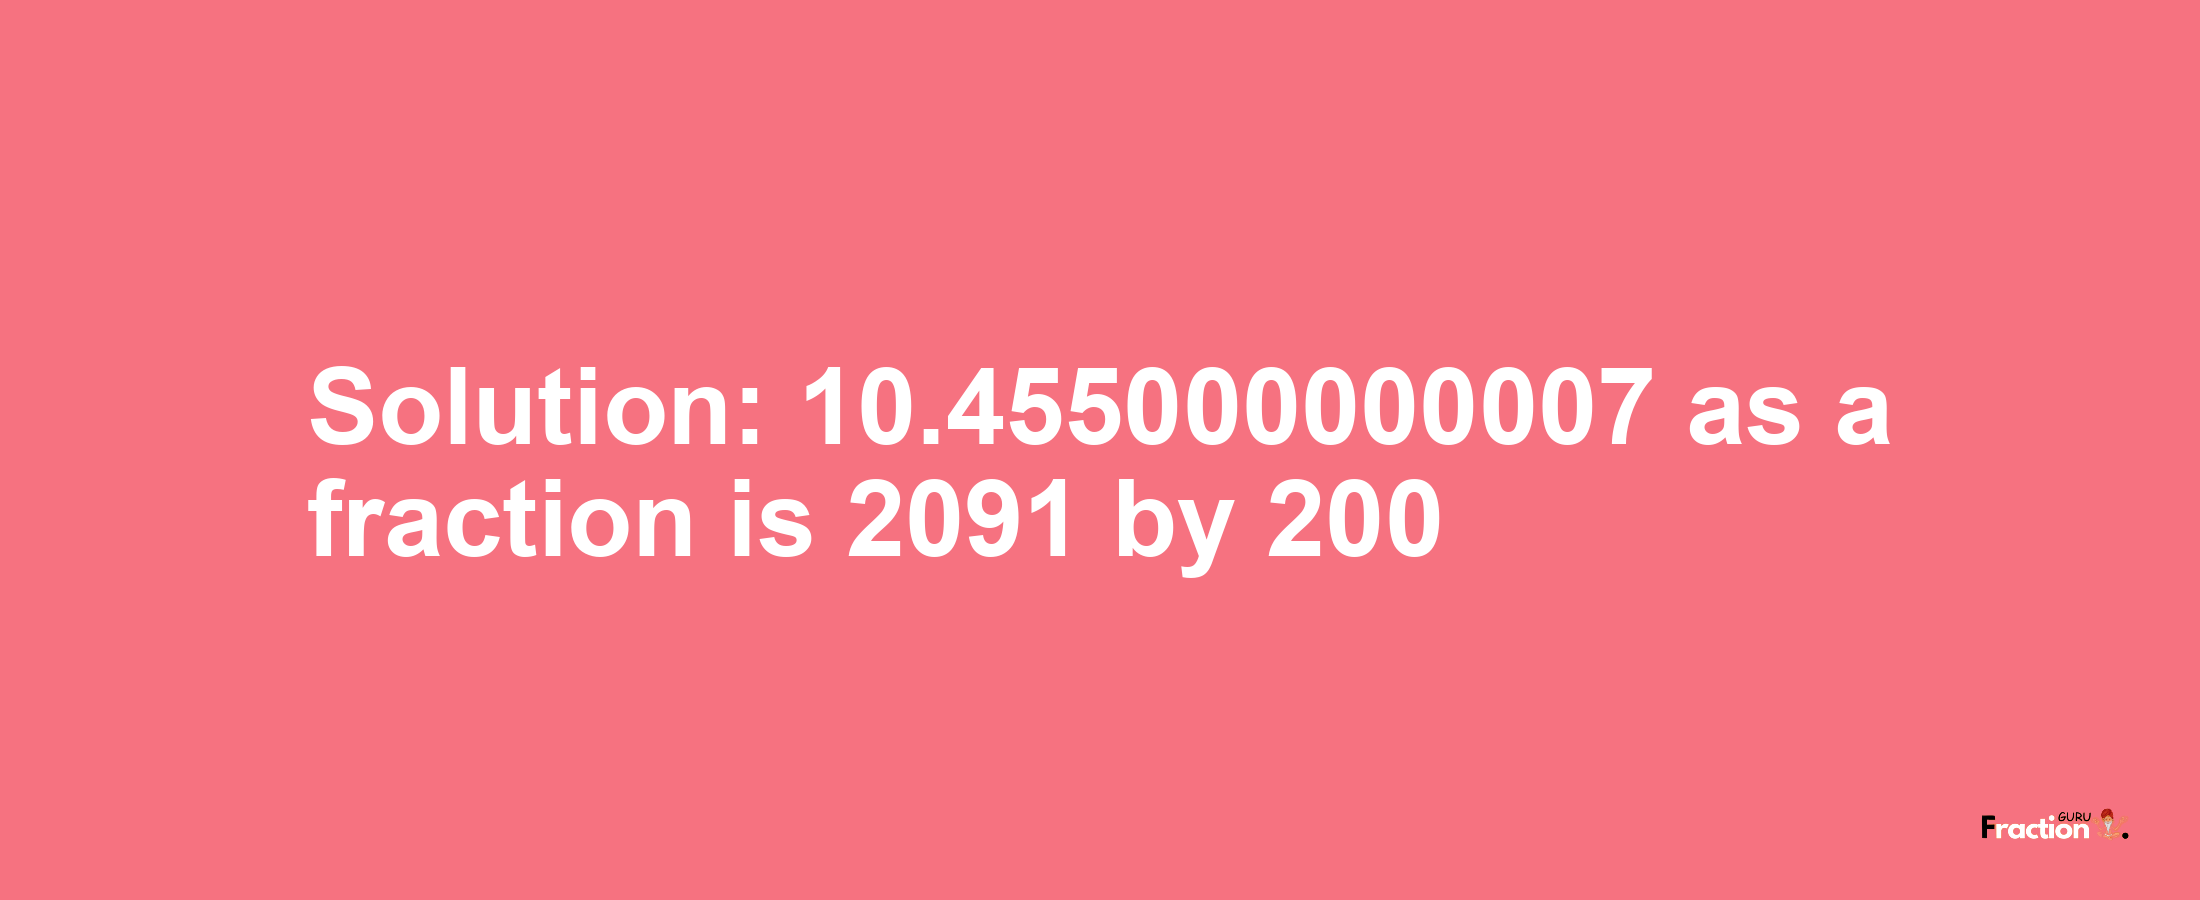 Solution:10.455000000007 as a fraction is 2091/200